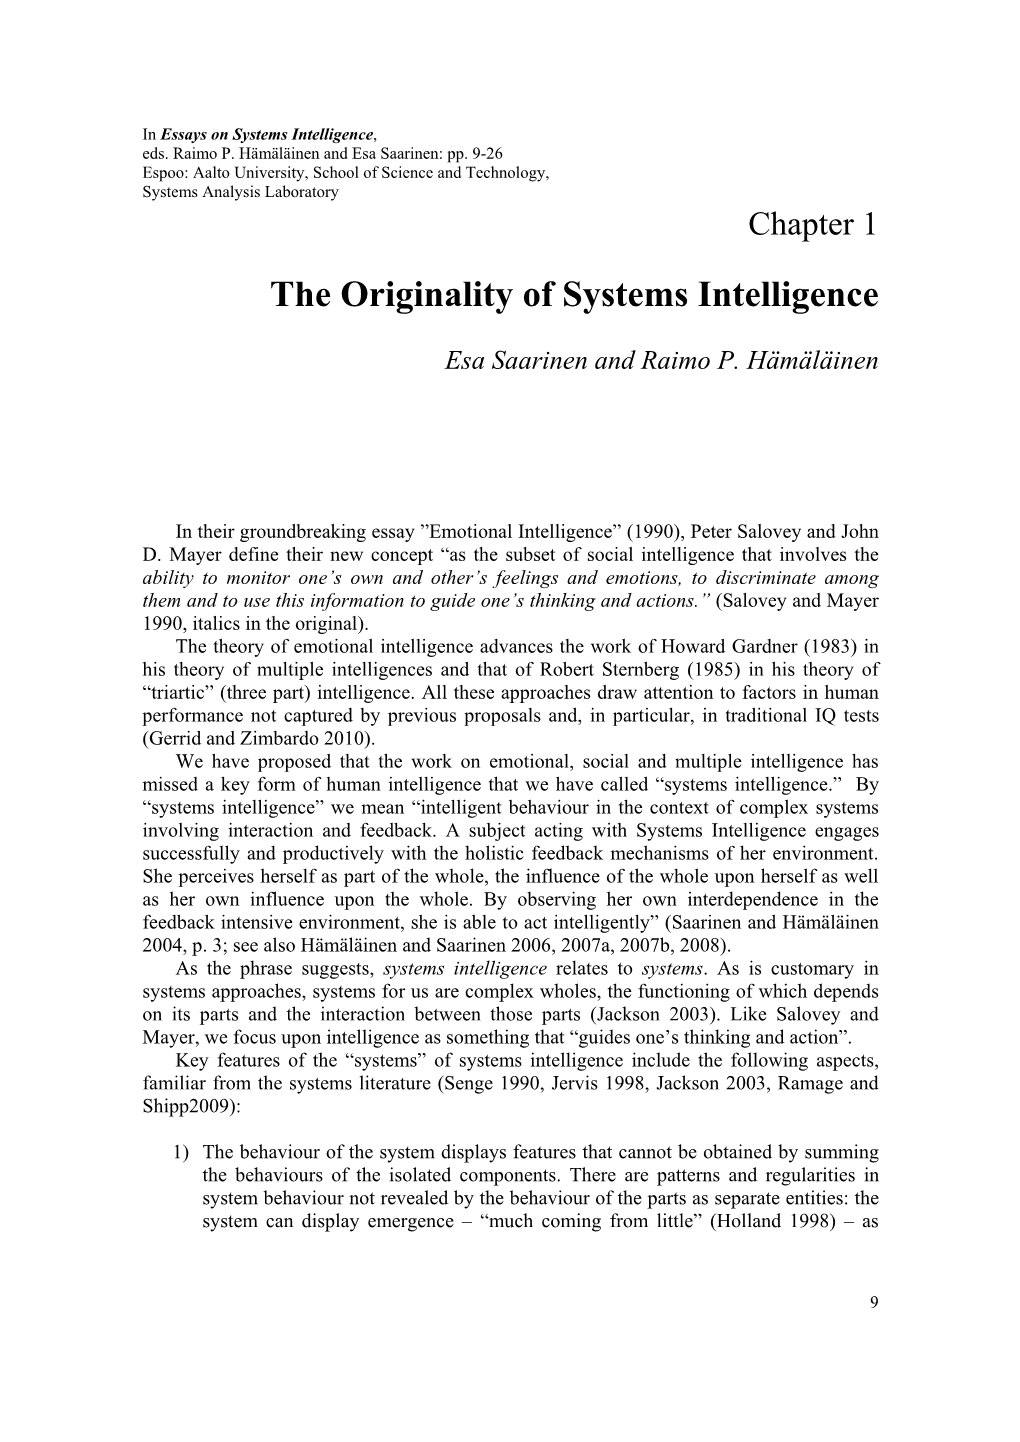 The Originality of Systems Intelligence